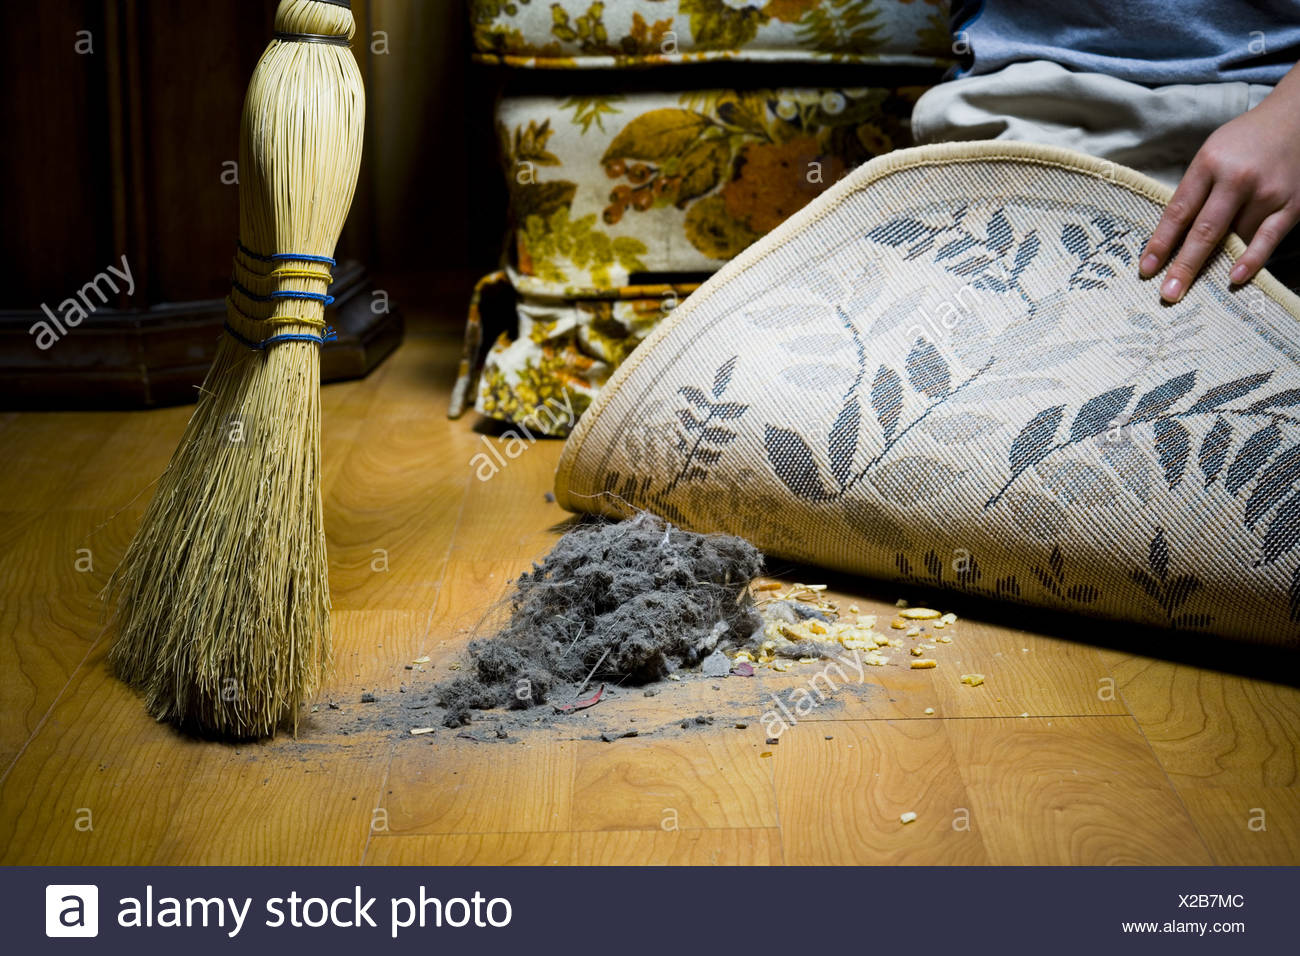 Sweeping dirt under rug Stock Photo: 276842732 - Alamy